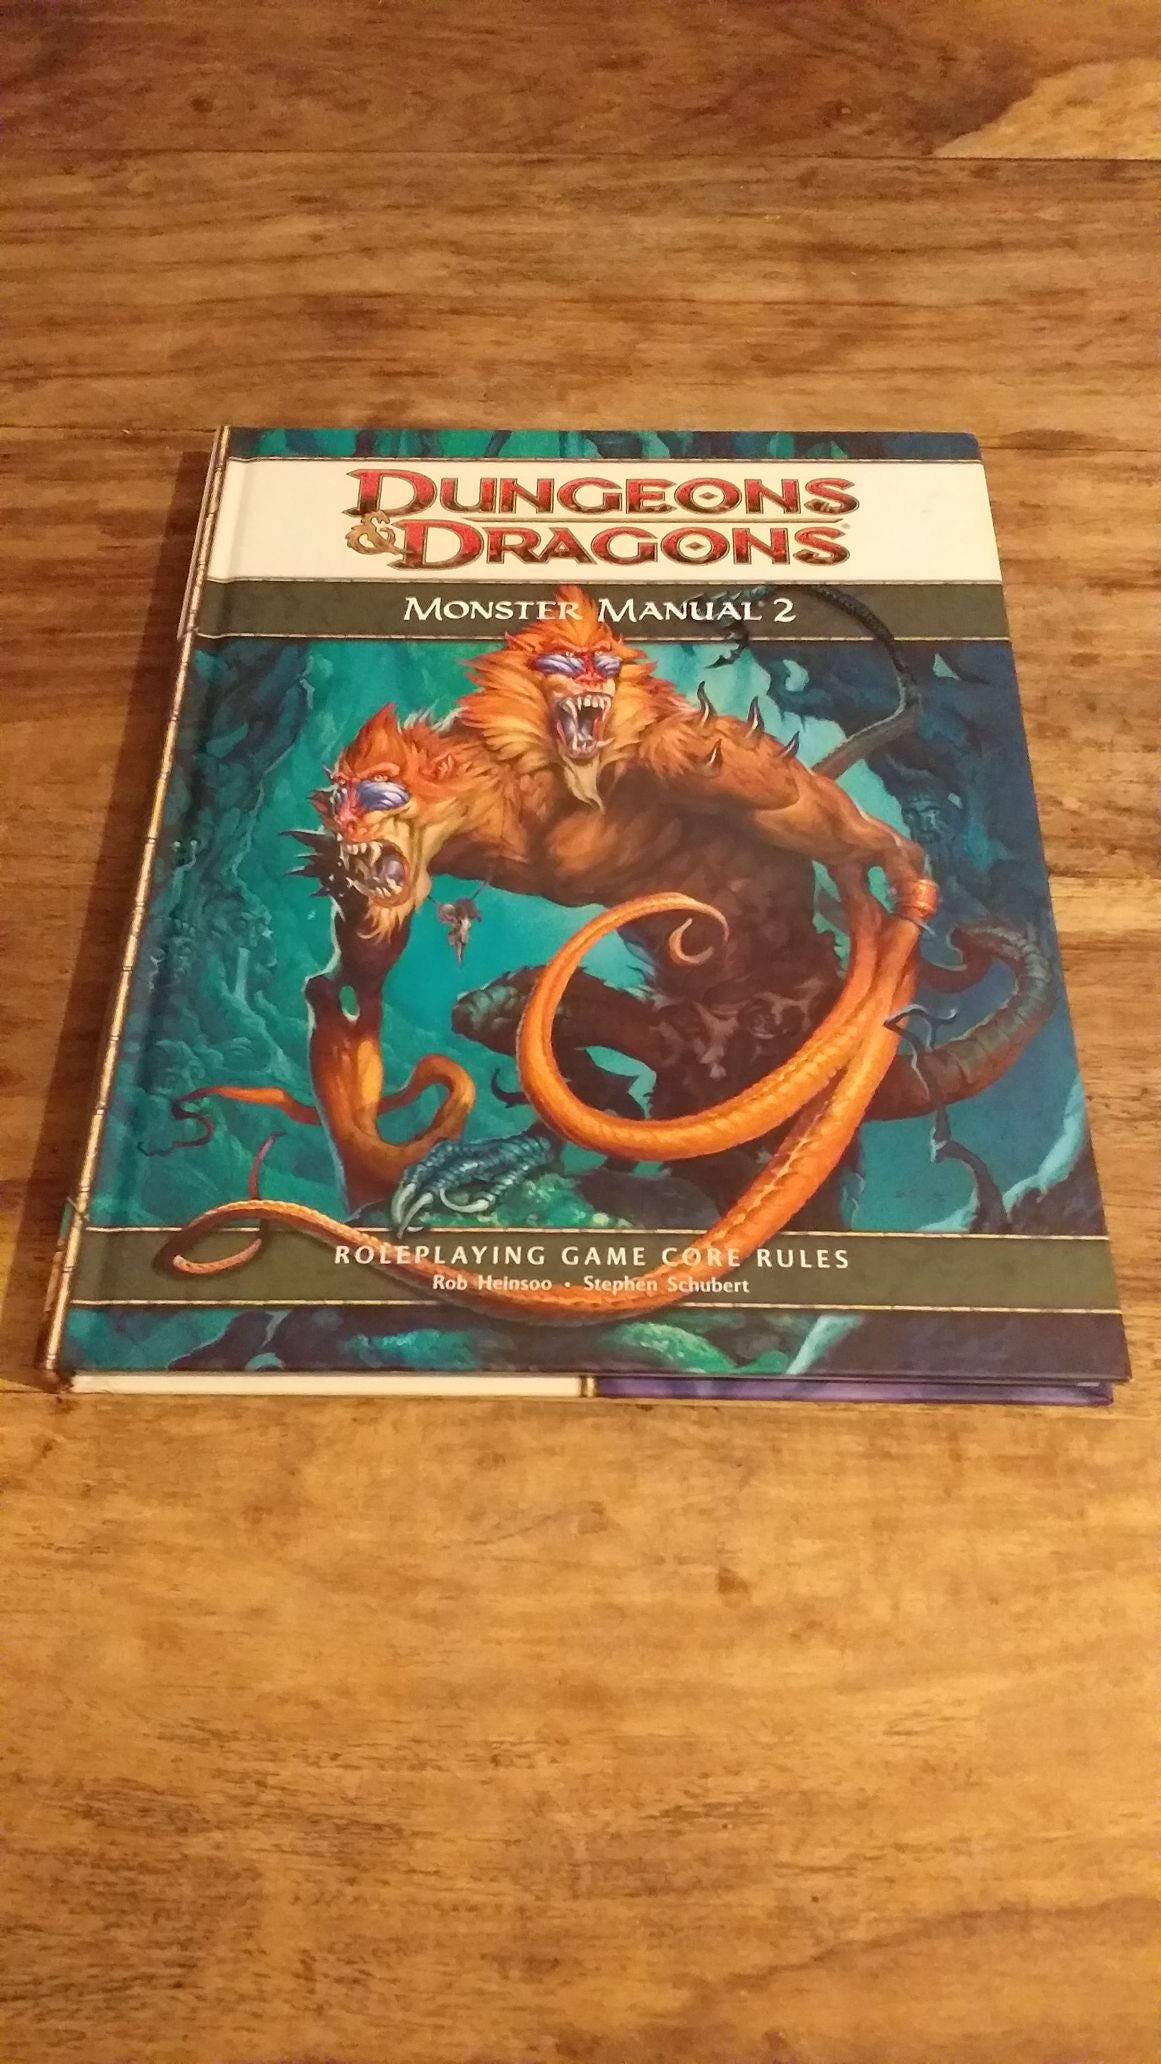 Monster Manual 2 Dungeons & Dragons 4th Edition Hardback Wizards of the Coast